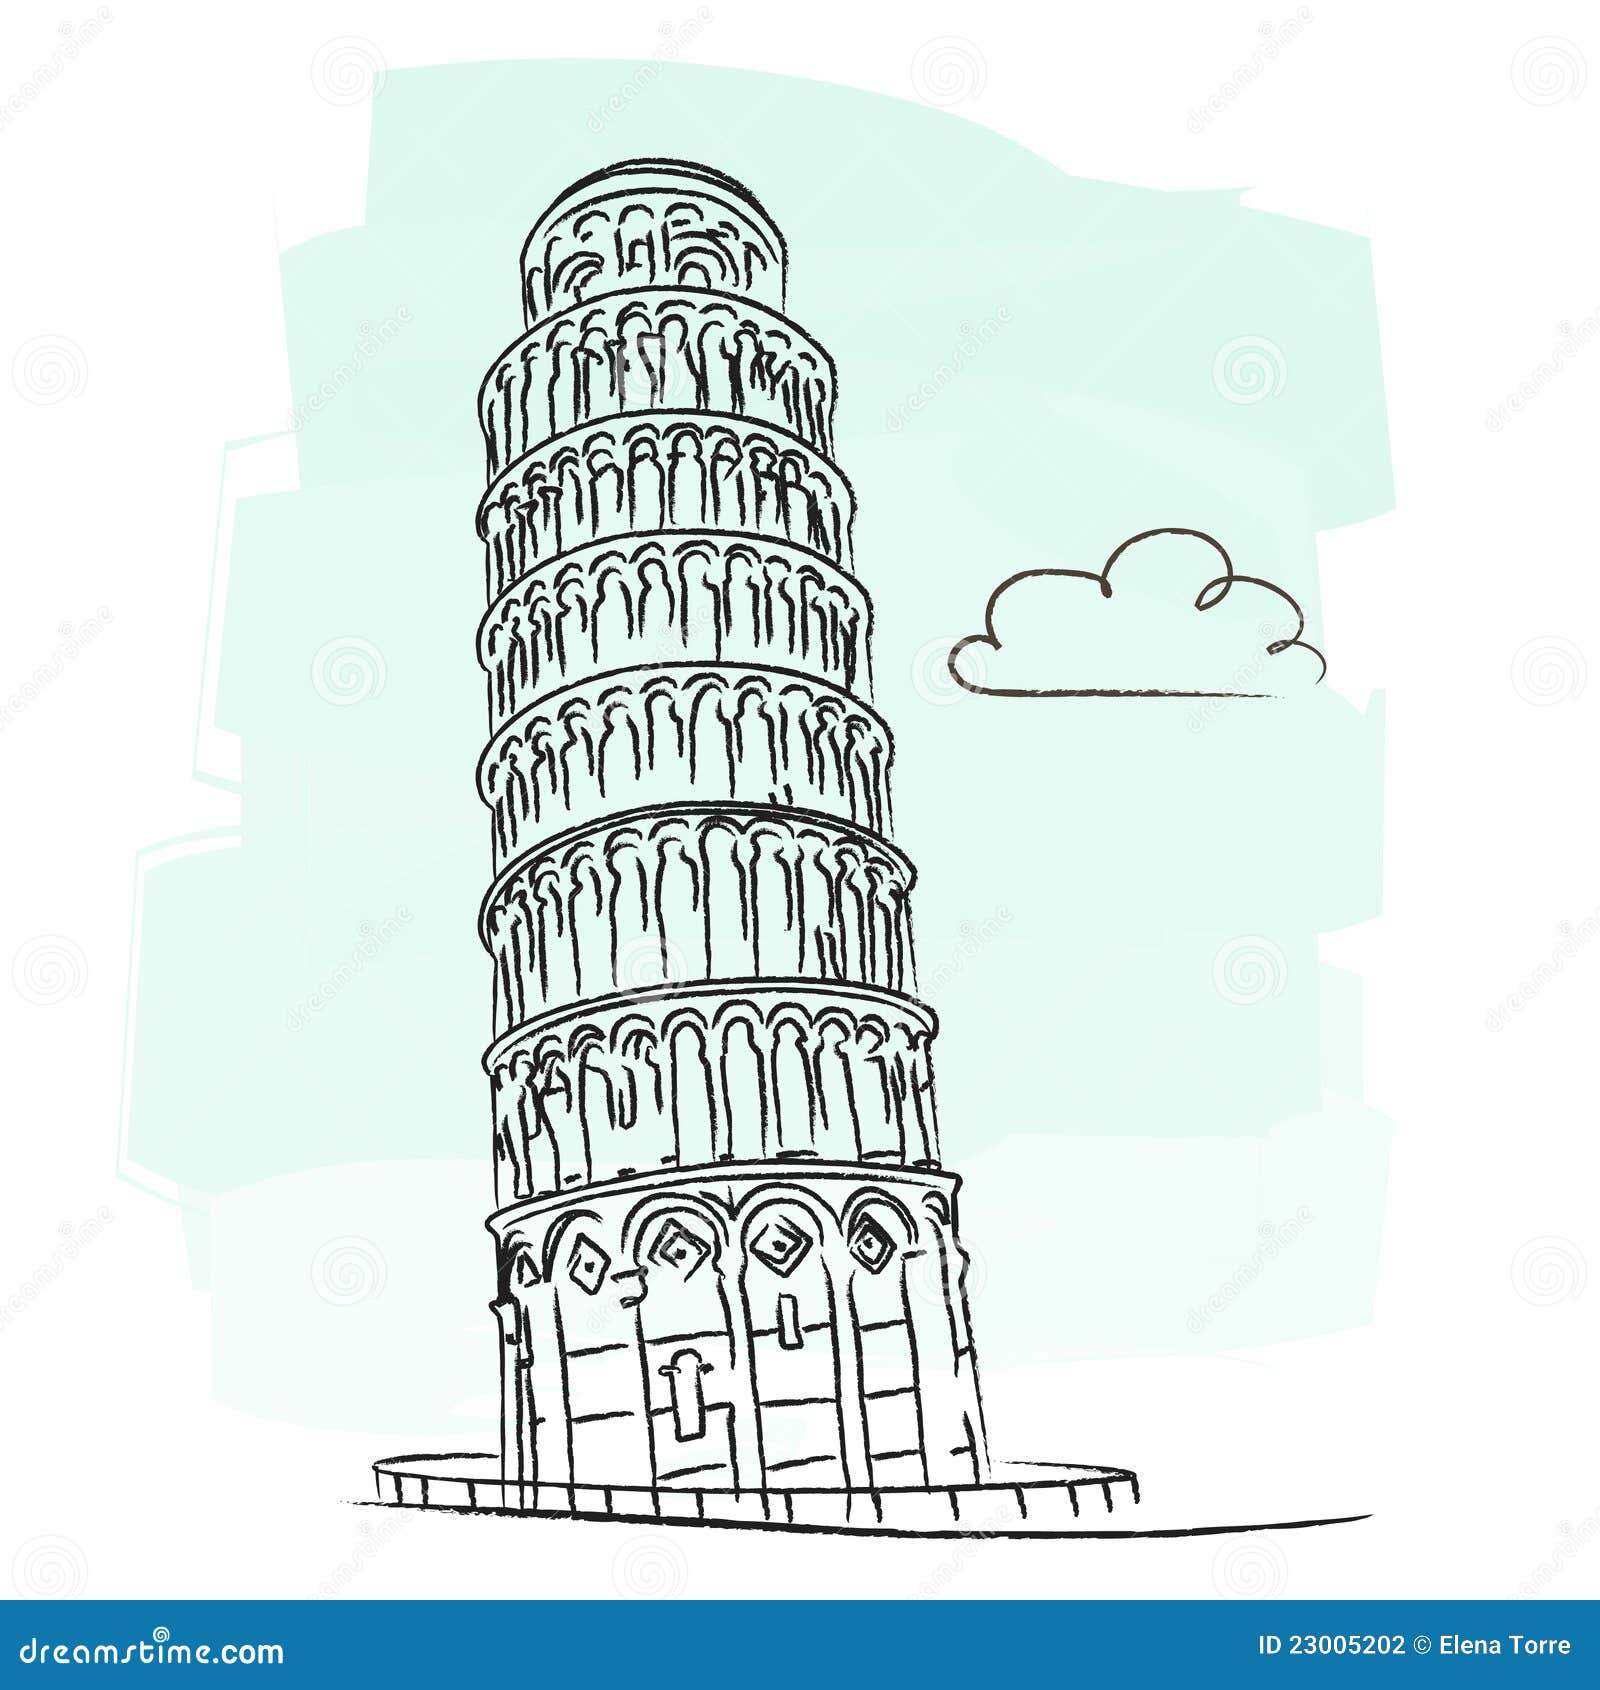 How to draw the leaning tower of Pisa | Step by step Drawing tutorials